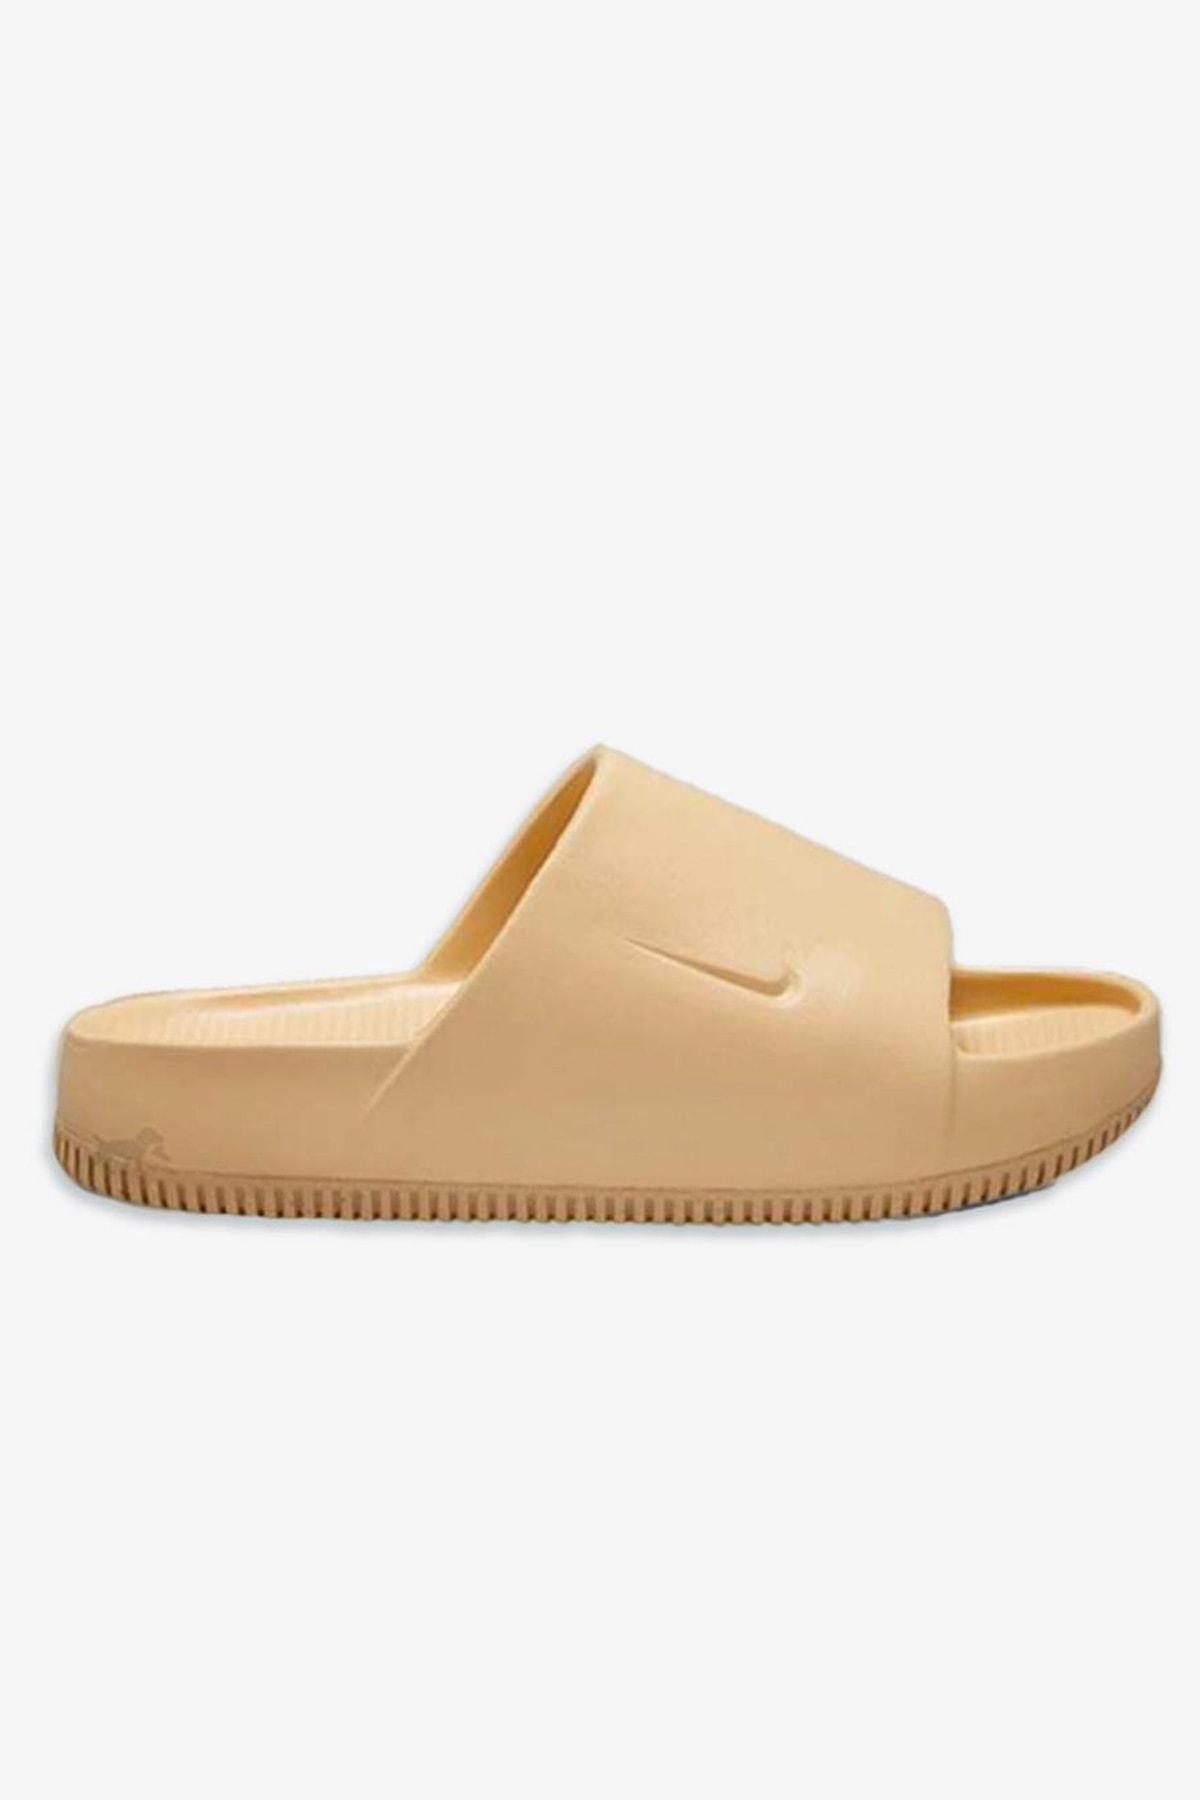 s Hottest New Sandal Release Is This Cushy Slide